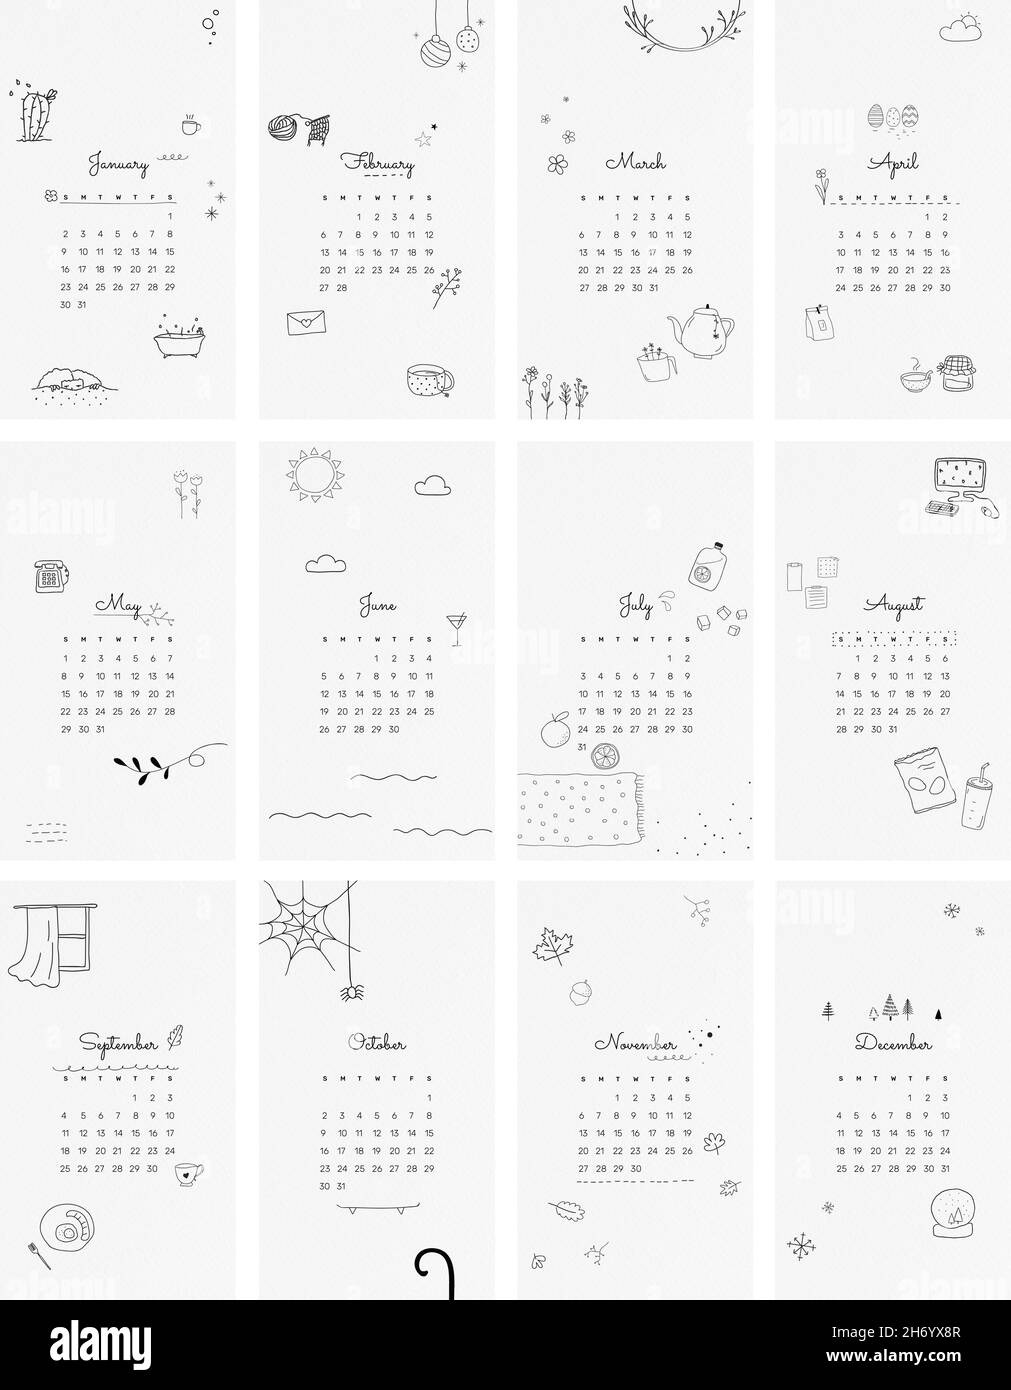 Cute 2022 monthly calendar template doodle illustration iPhone 1011x1390